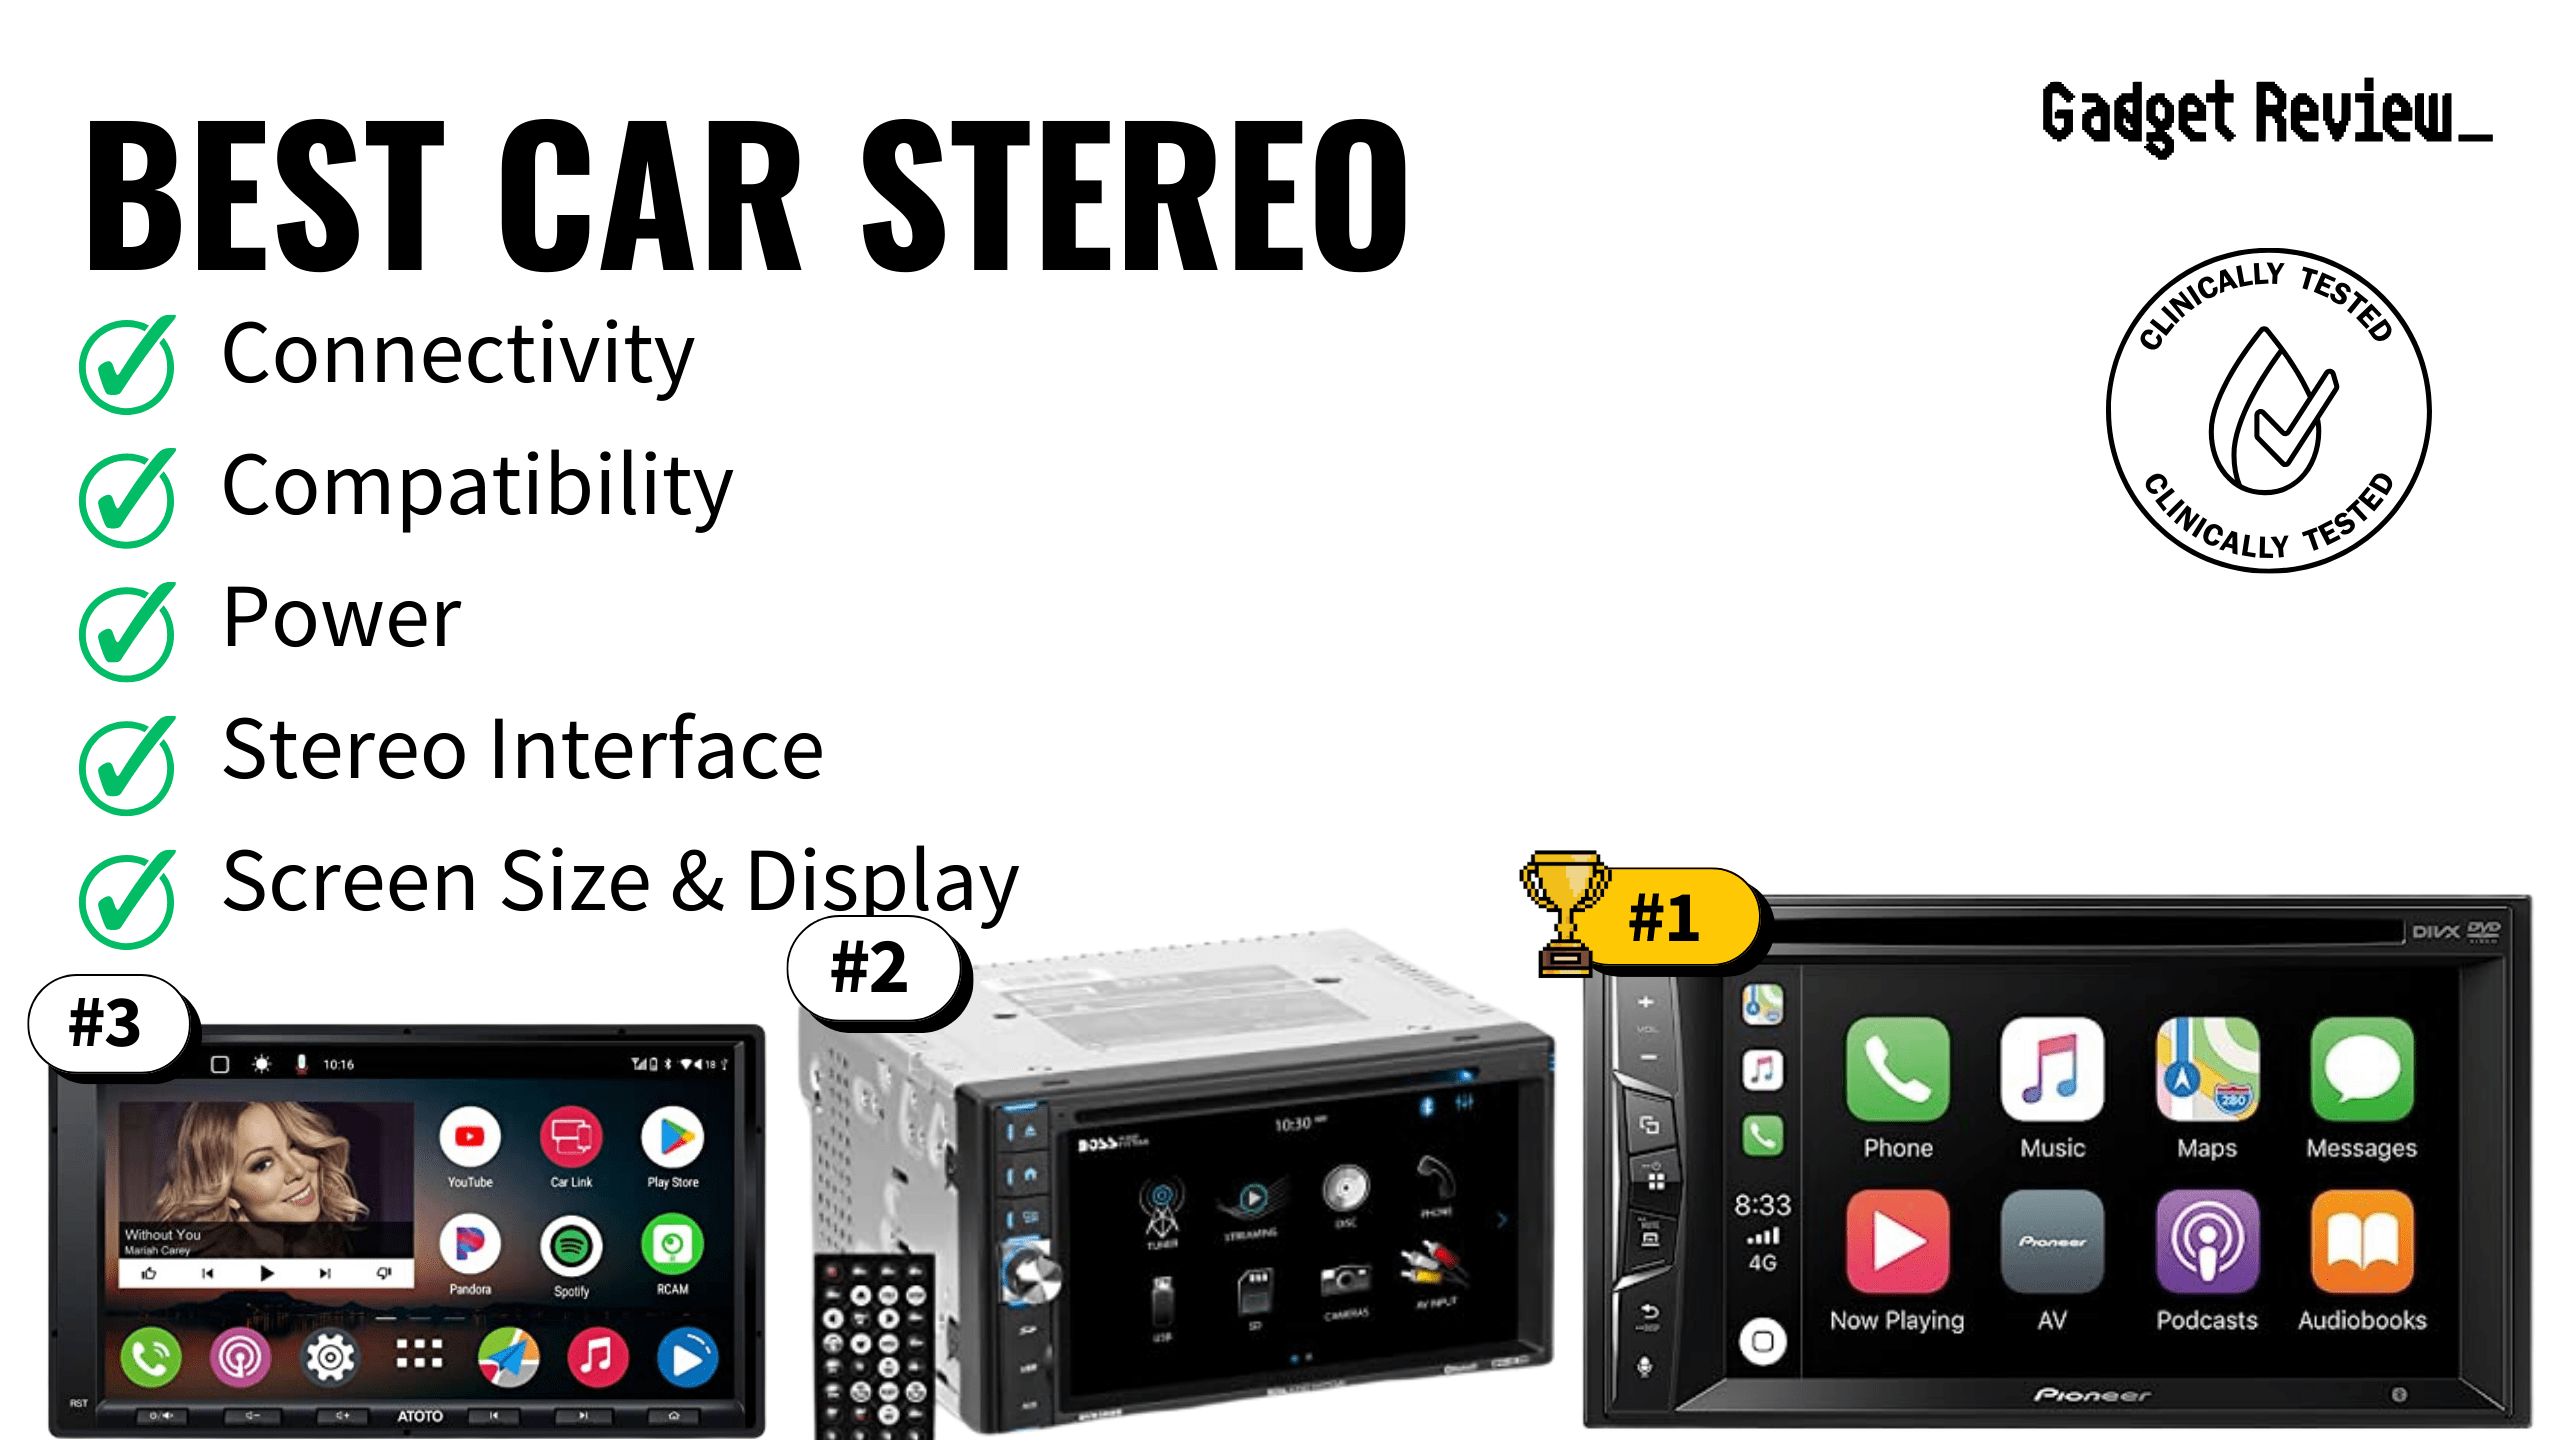 best car stereo featured image that shows the top three best car accessorie models